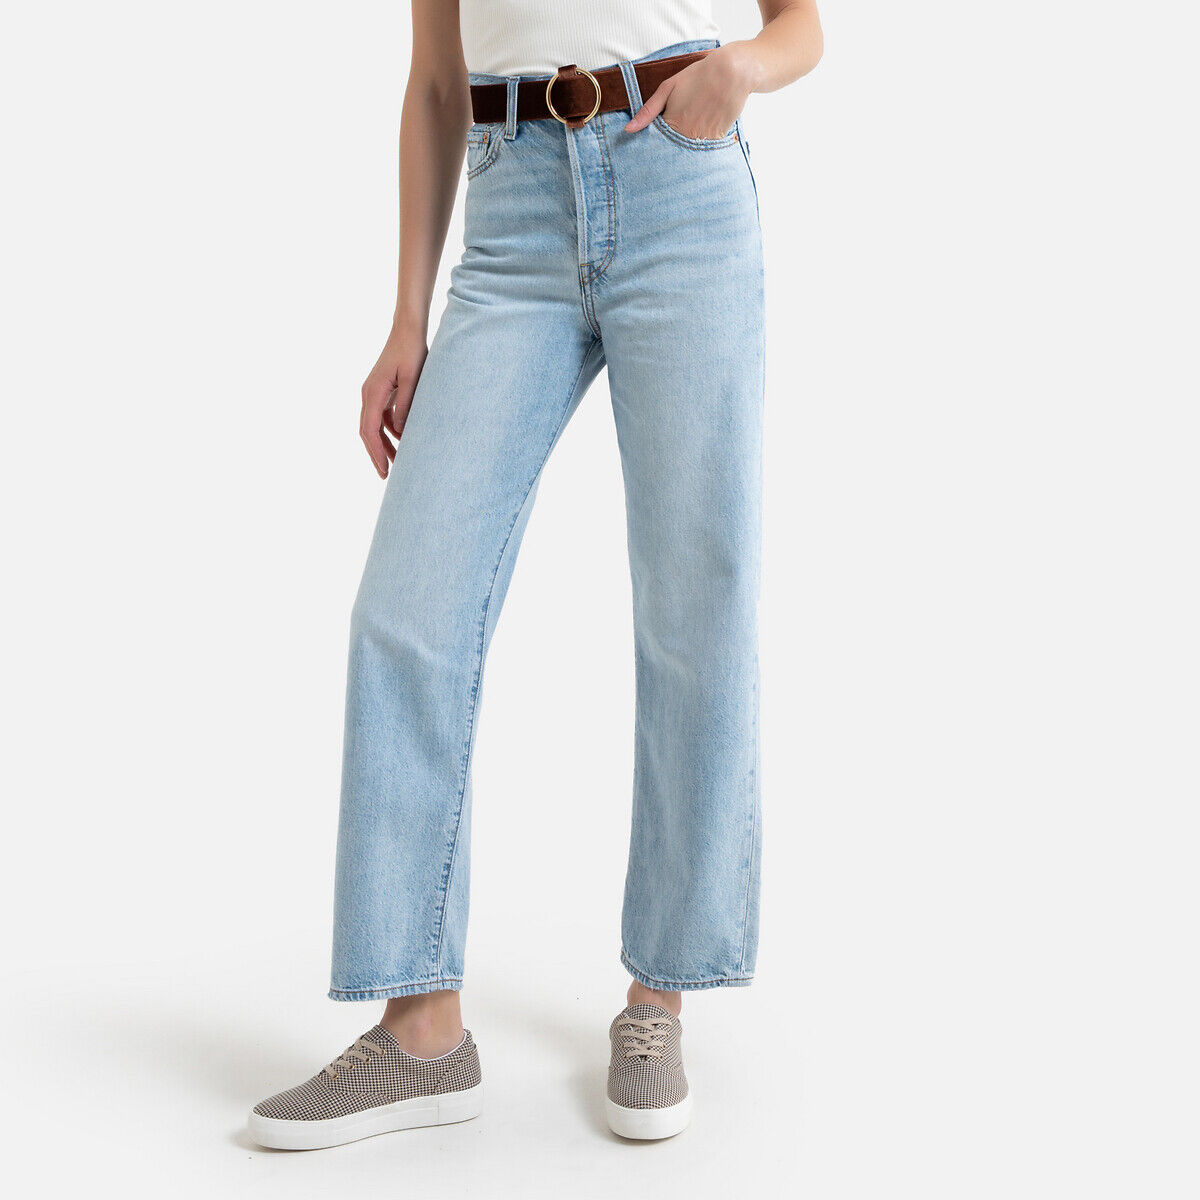 Levi's Jeans Ribcage Straight Ankle   Middle road